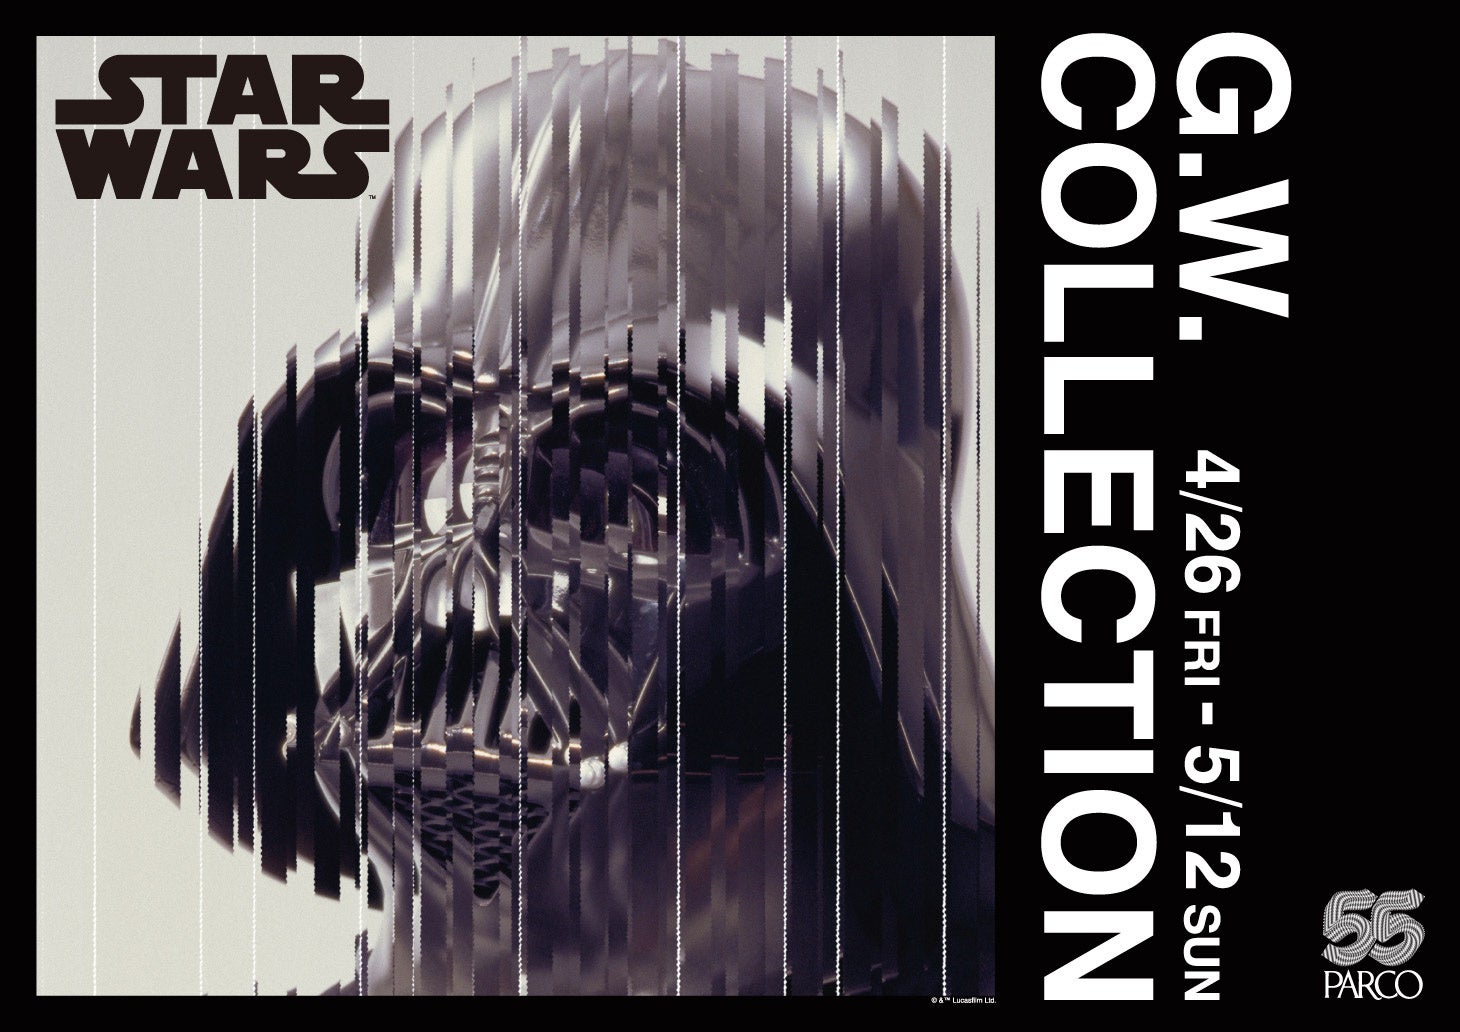 「STAR WARS G.W. COLLECTION -PARCO 55th CAMPAIGN-」スペシャルアイテムがパパブブレ仙台店にて4月26日(金)より発売開始。